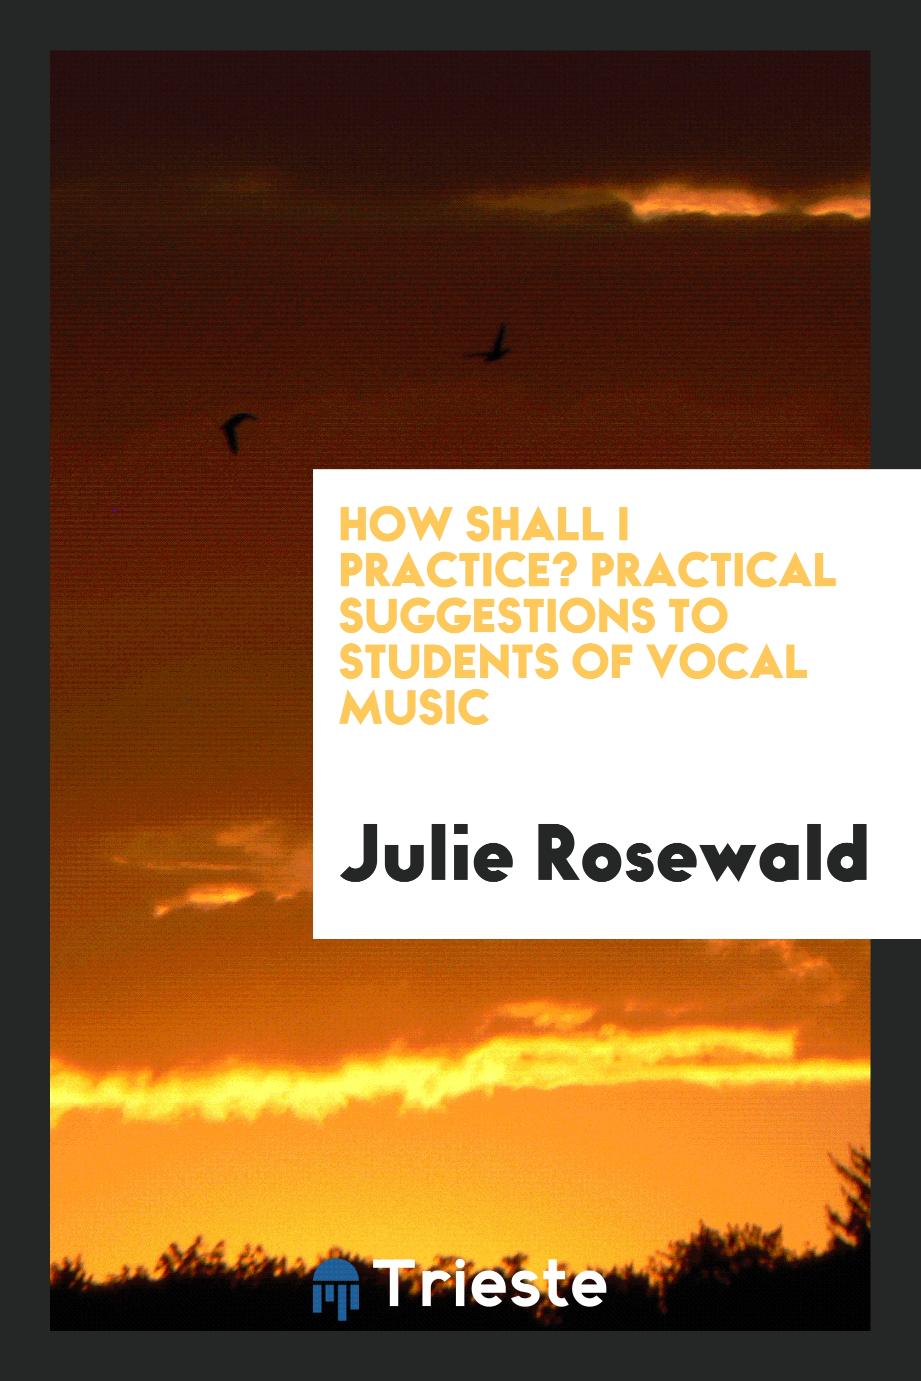 How Shall I Practice? Practical Suggestions to Students of Vocal Music